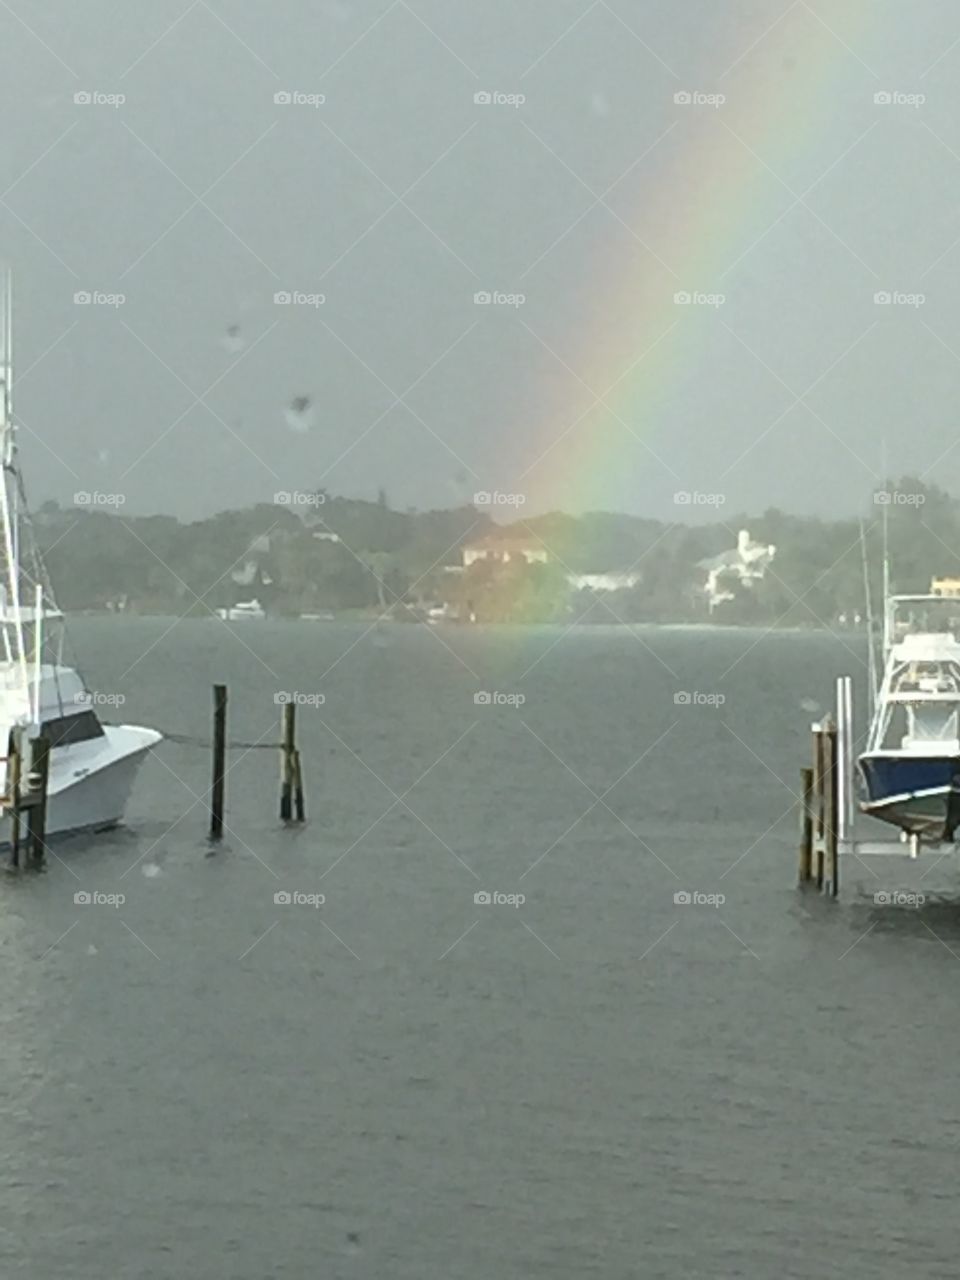 End of Rainbow. I saw that the rainbow ended between these two boats. How cool!  
